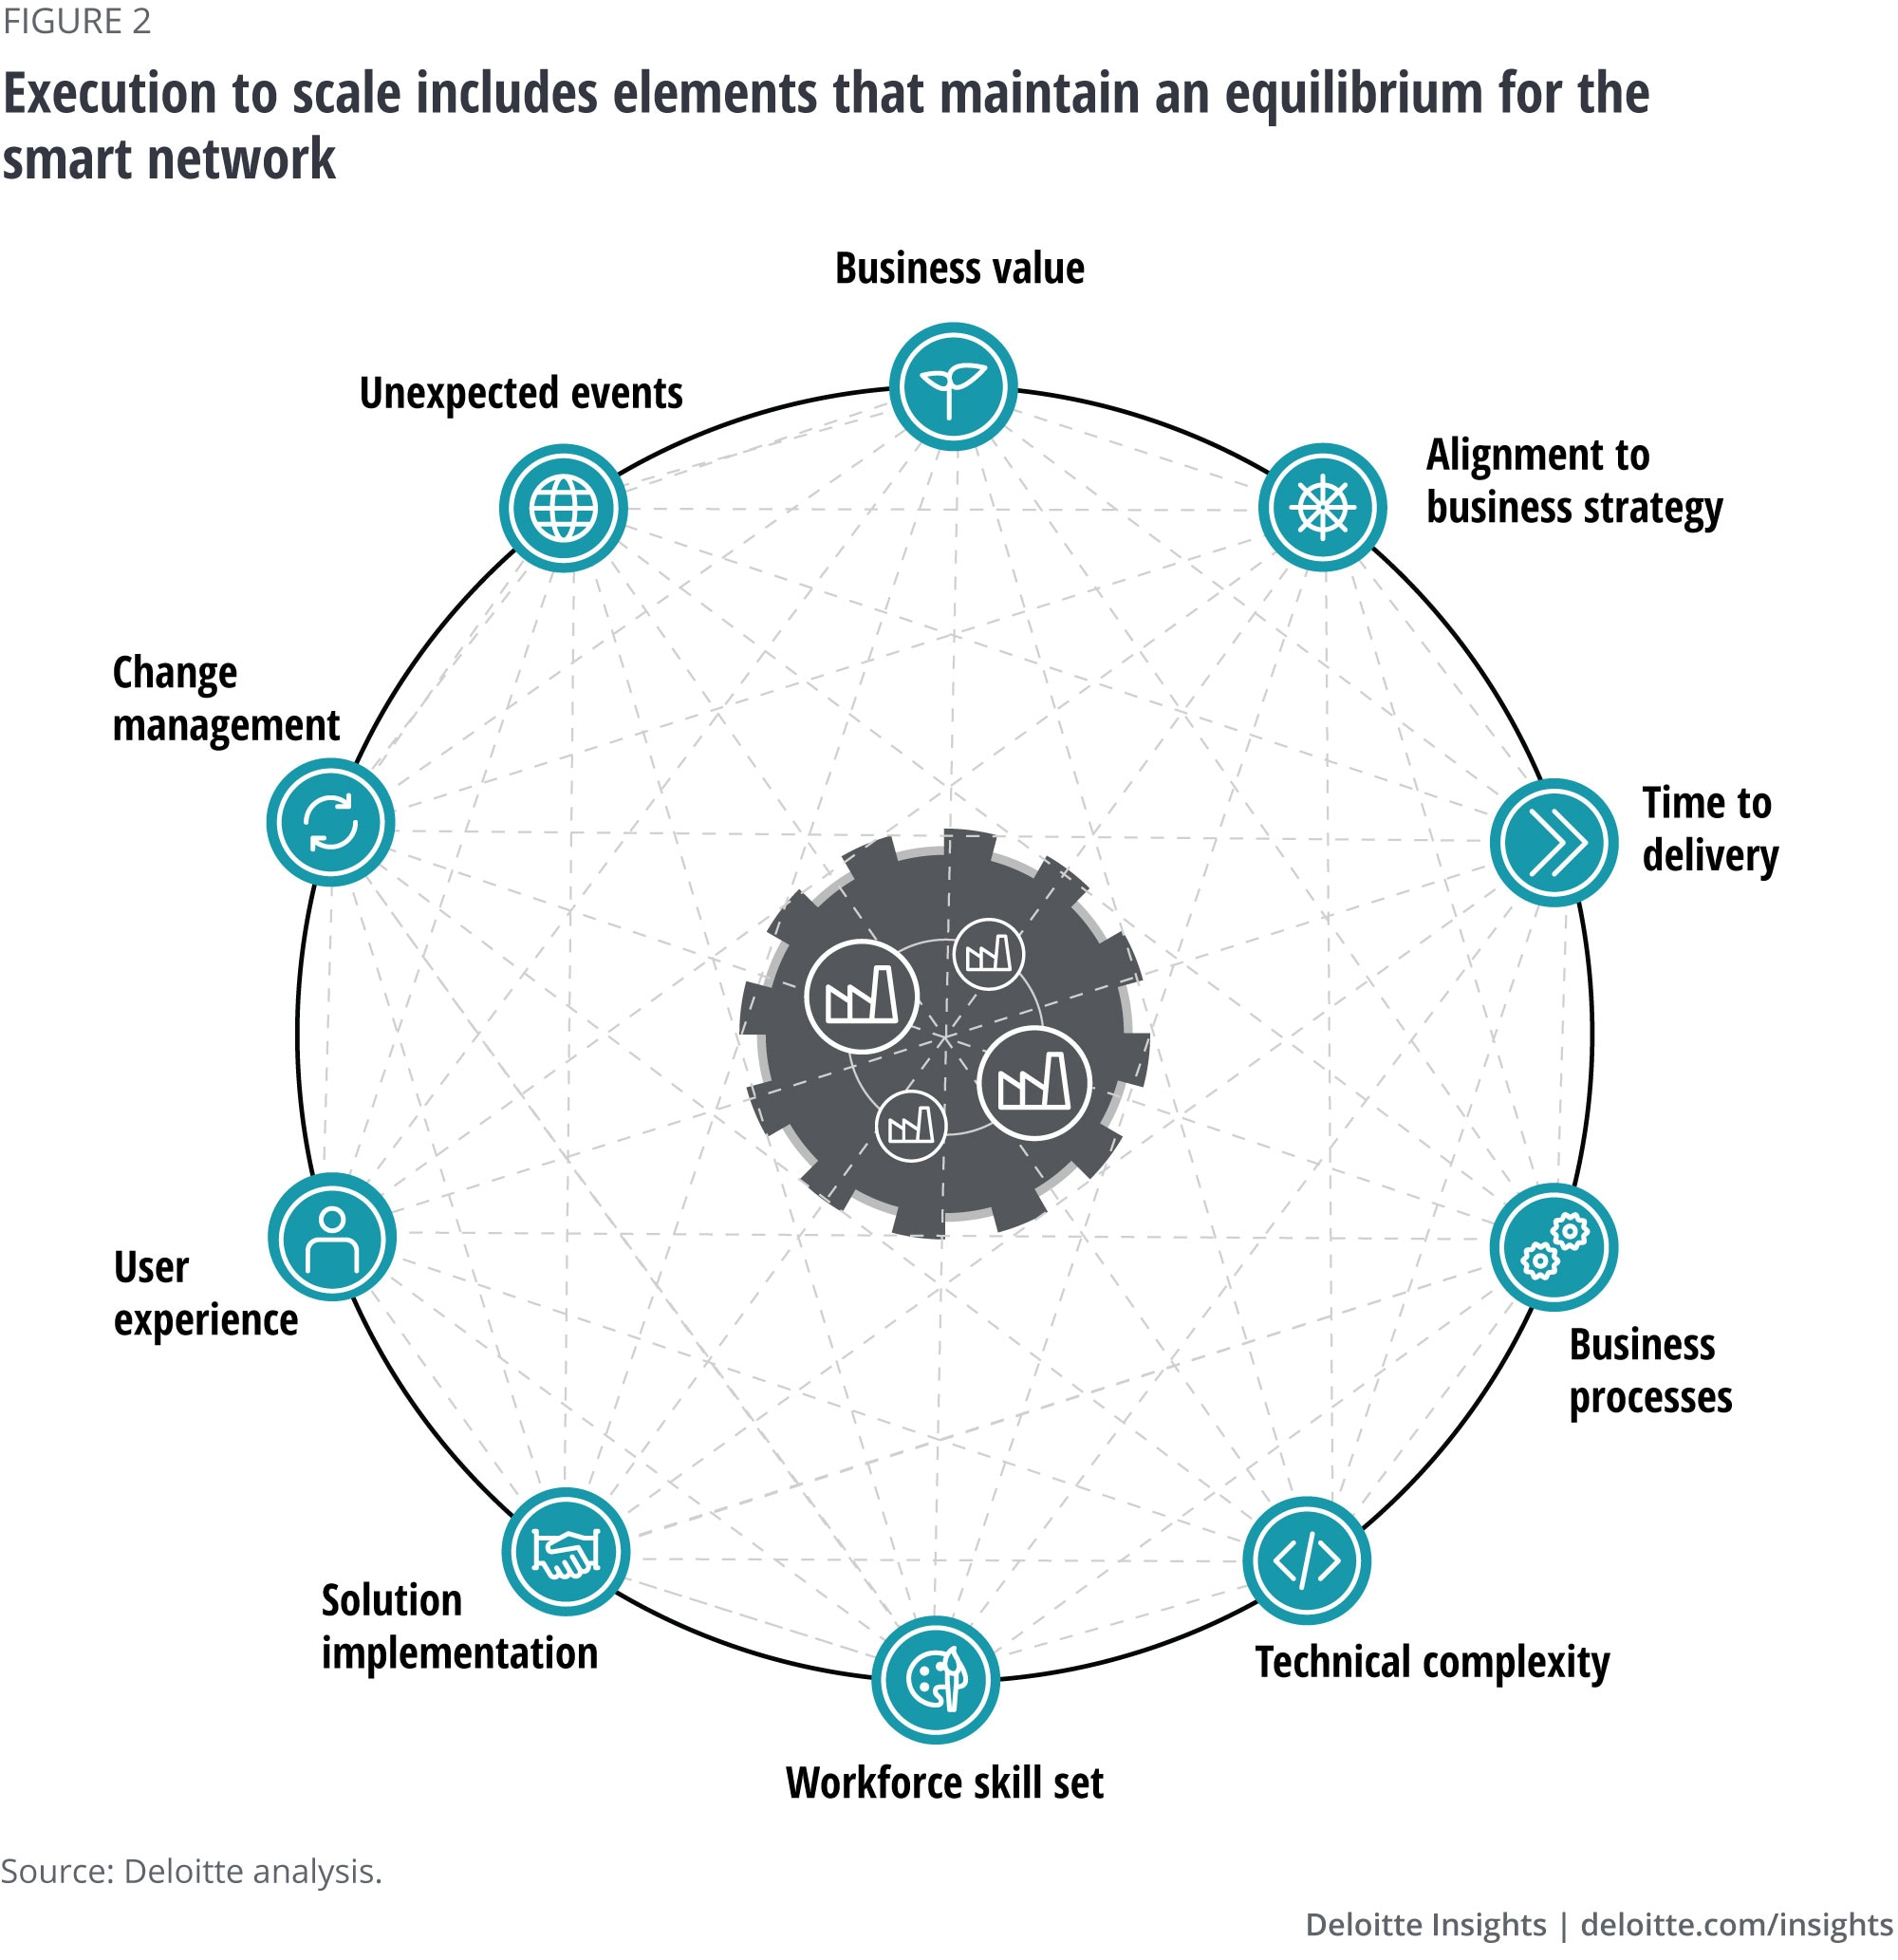 Execution to scale includes elements that maintain an equilibrium for the smart network